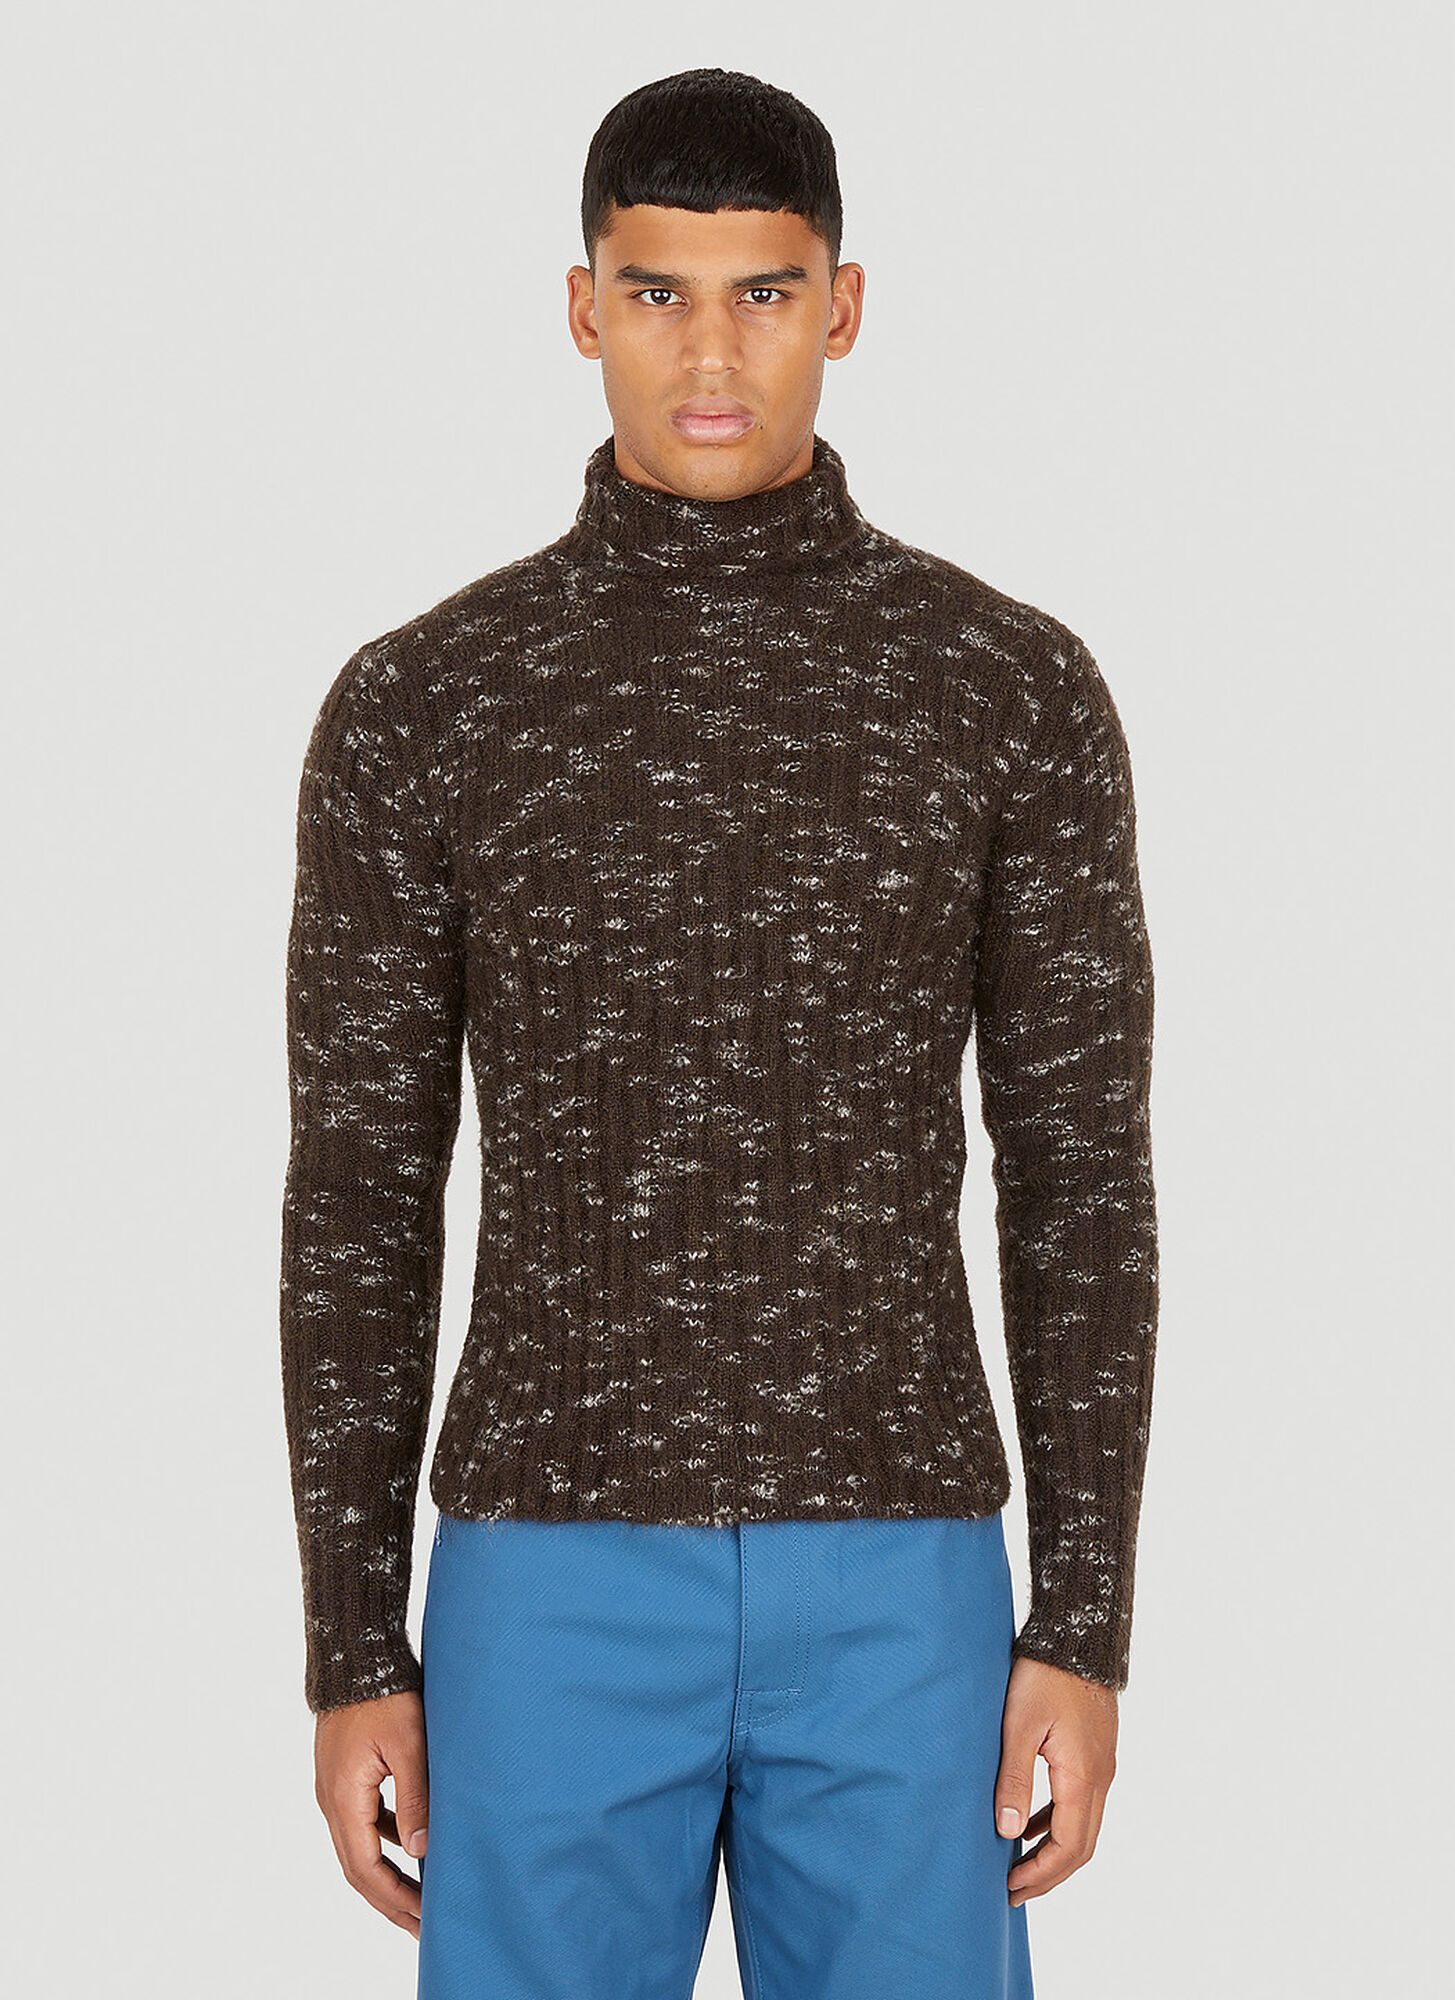 Raf Simons Spotted Sweater In Brown